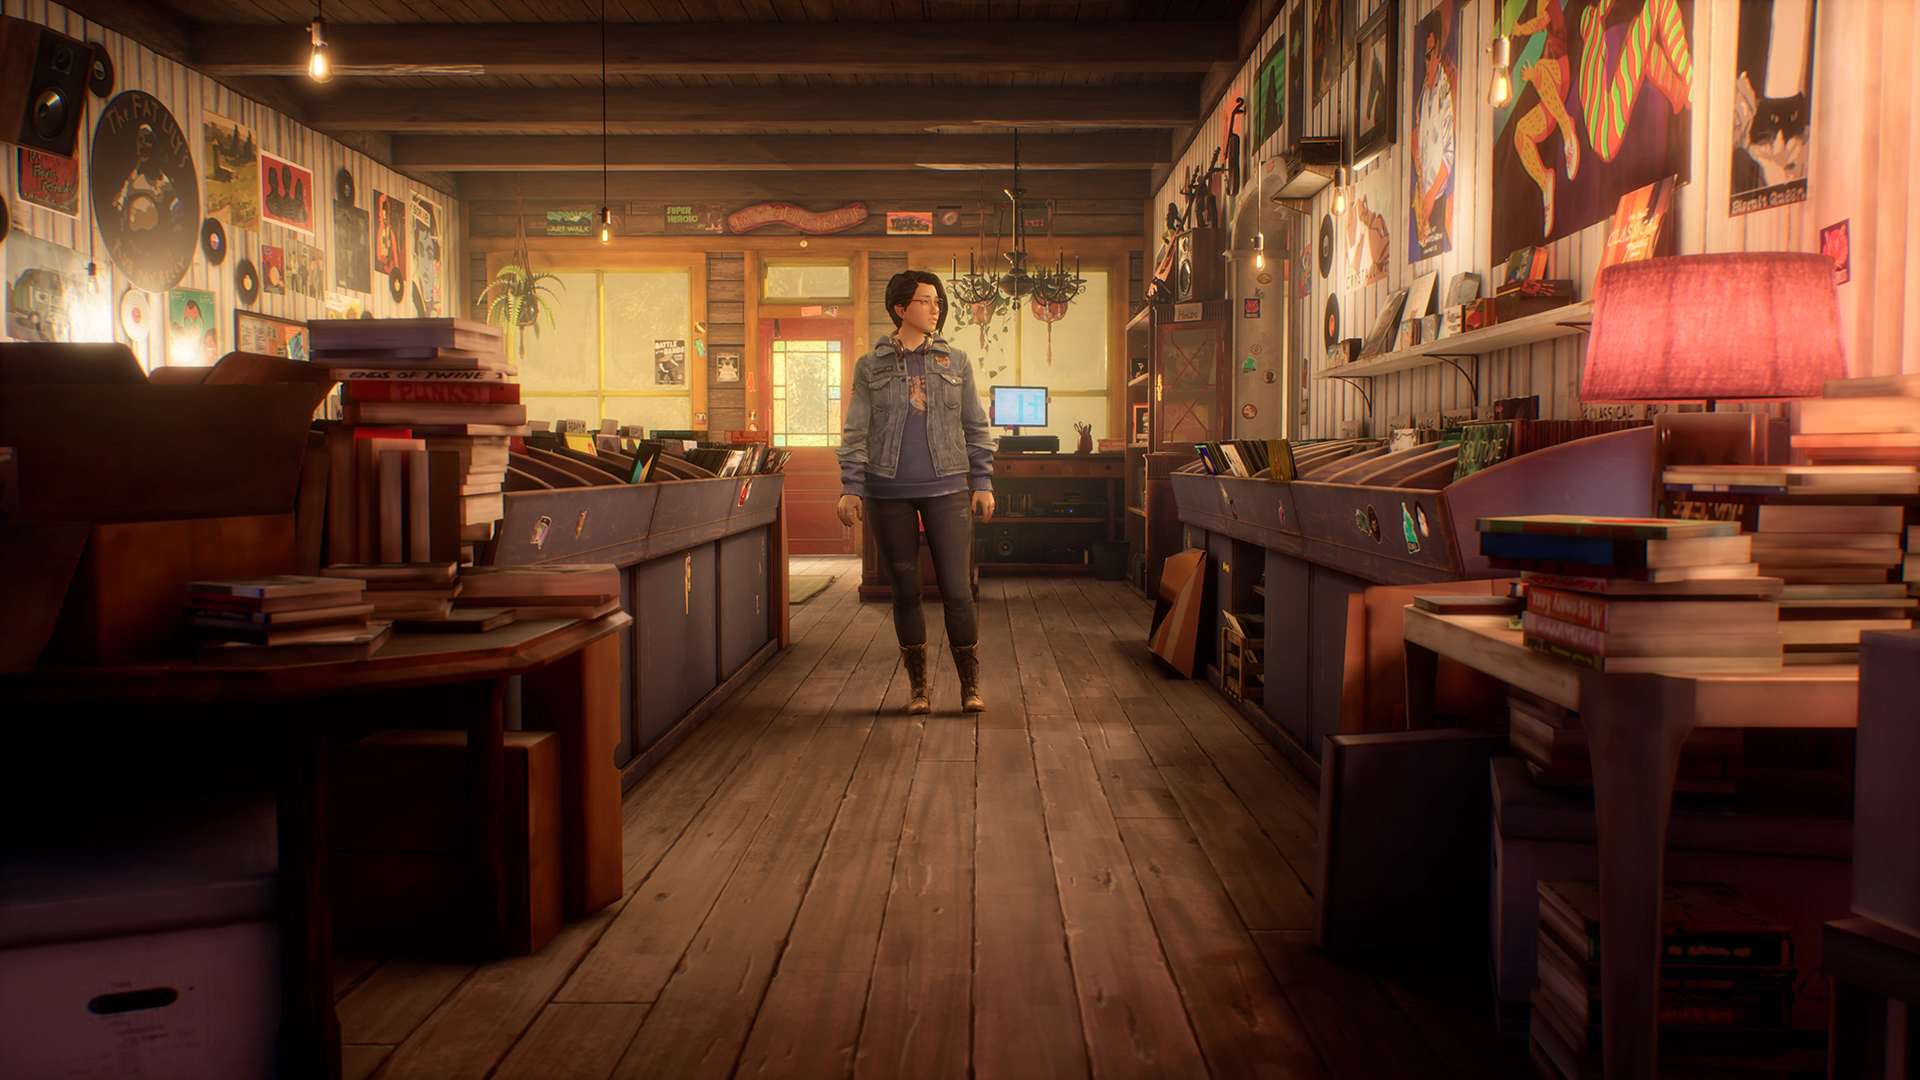 LIFE IS STRANGE: TRUE COLORS AVAILABLE NOWNews